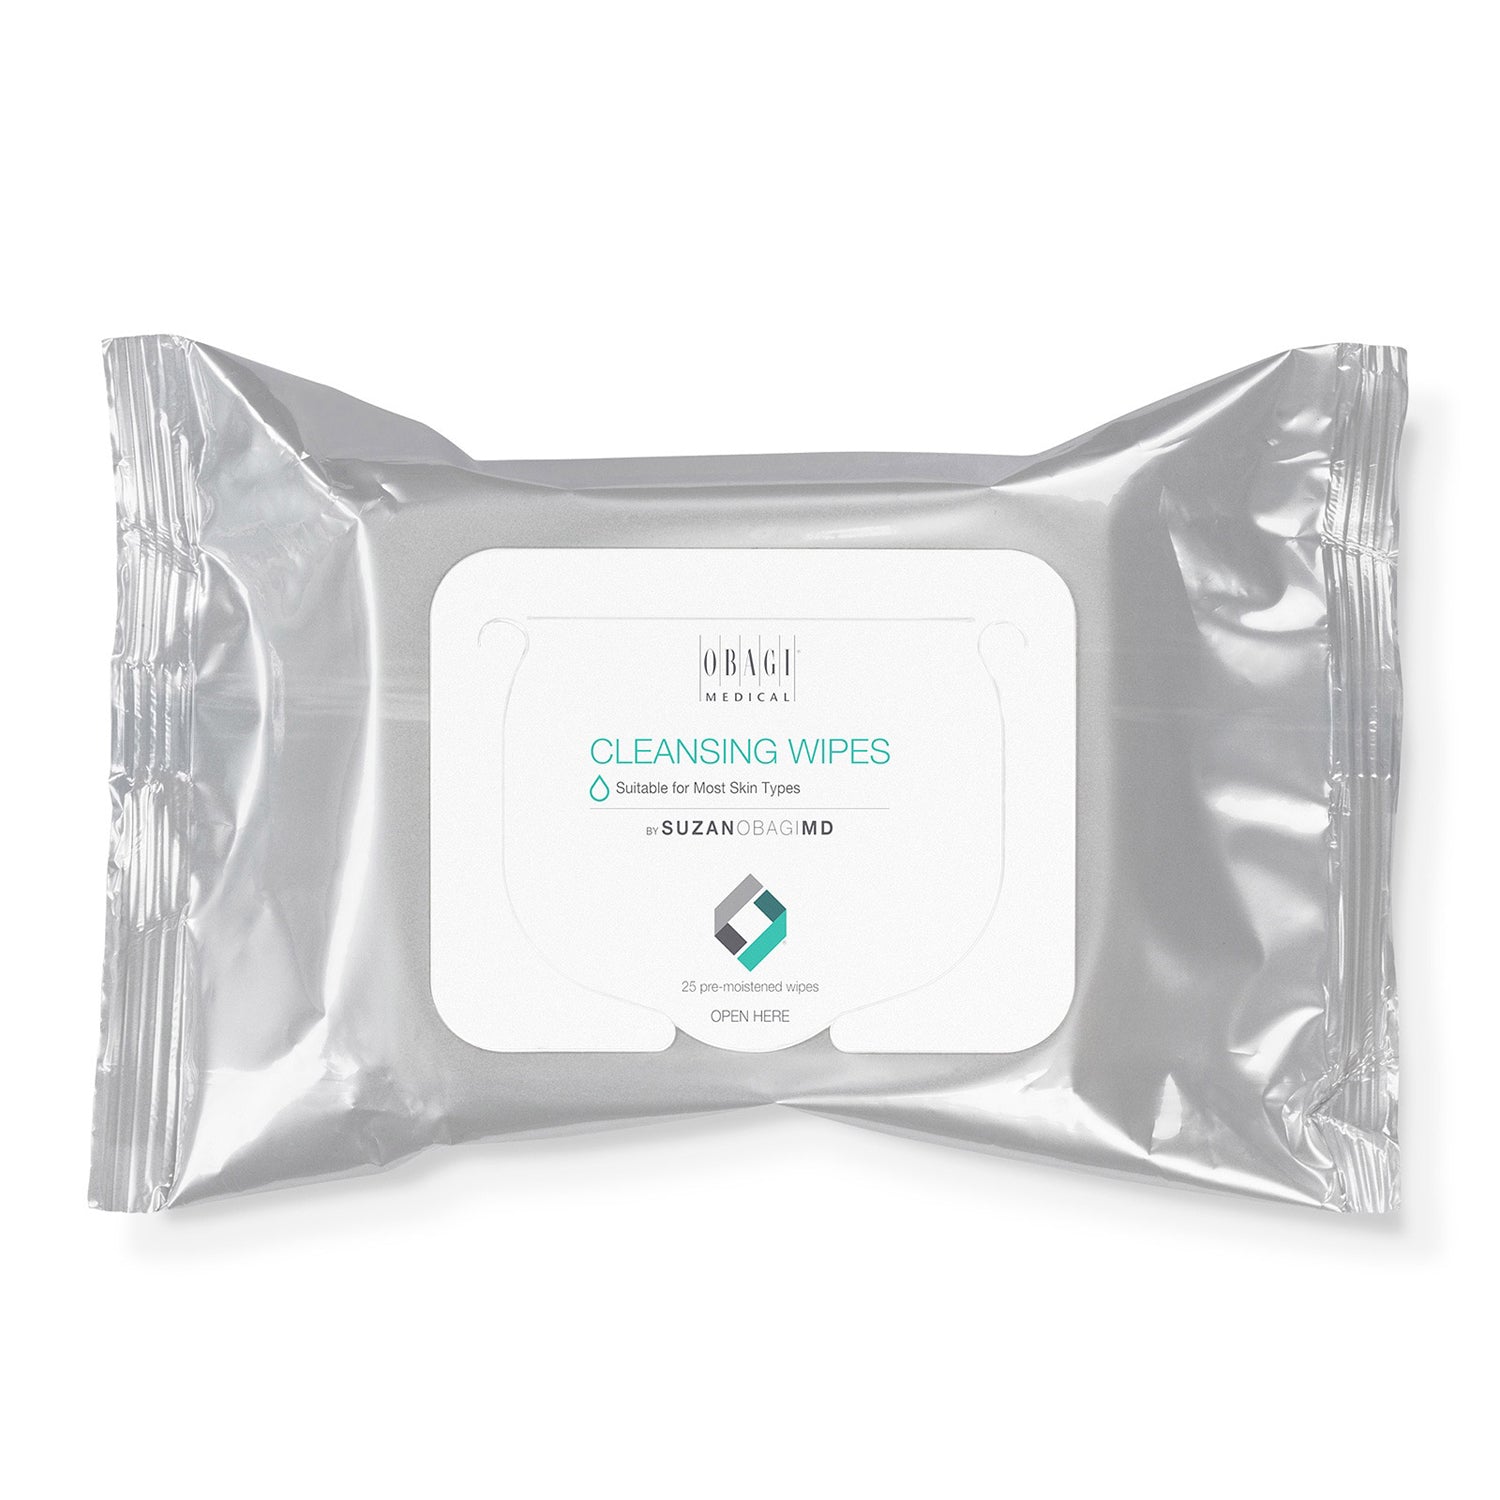 Obagi Medical Suzanobagimd Cleansing Wipes  from MyExceptionalSkinCare.com Product